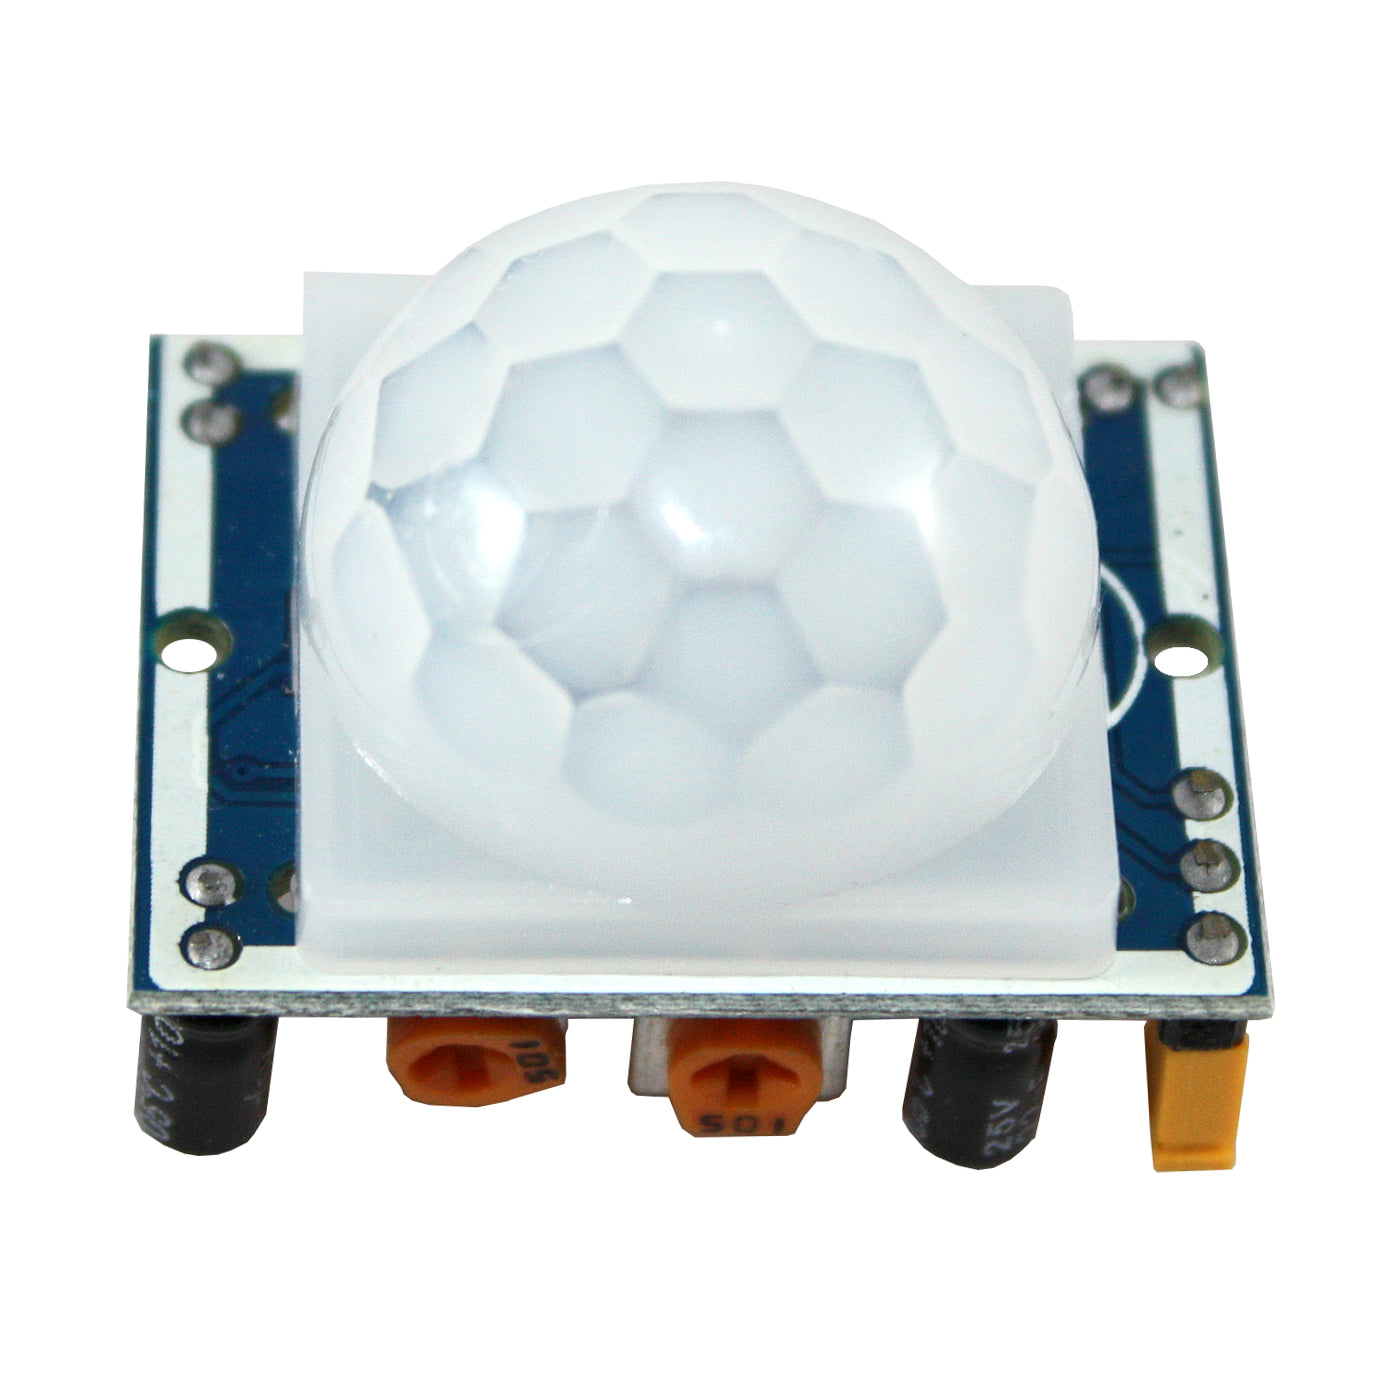 Motion Detection Module with Infrared Sensor